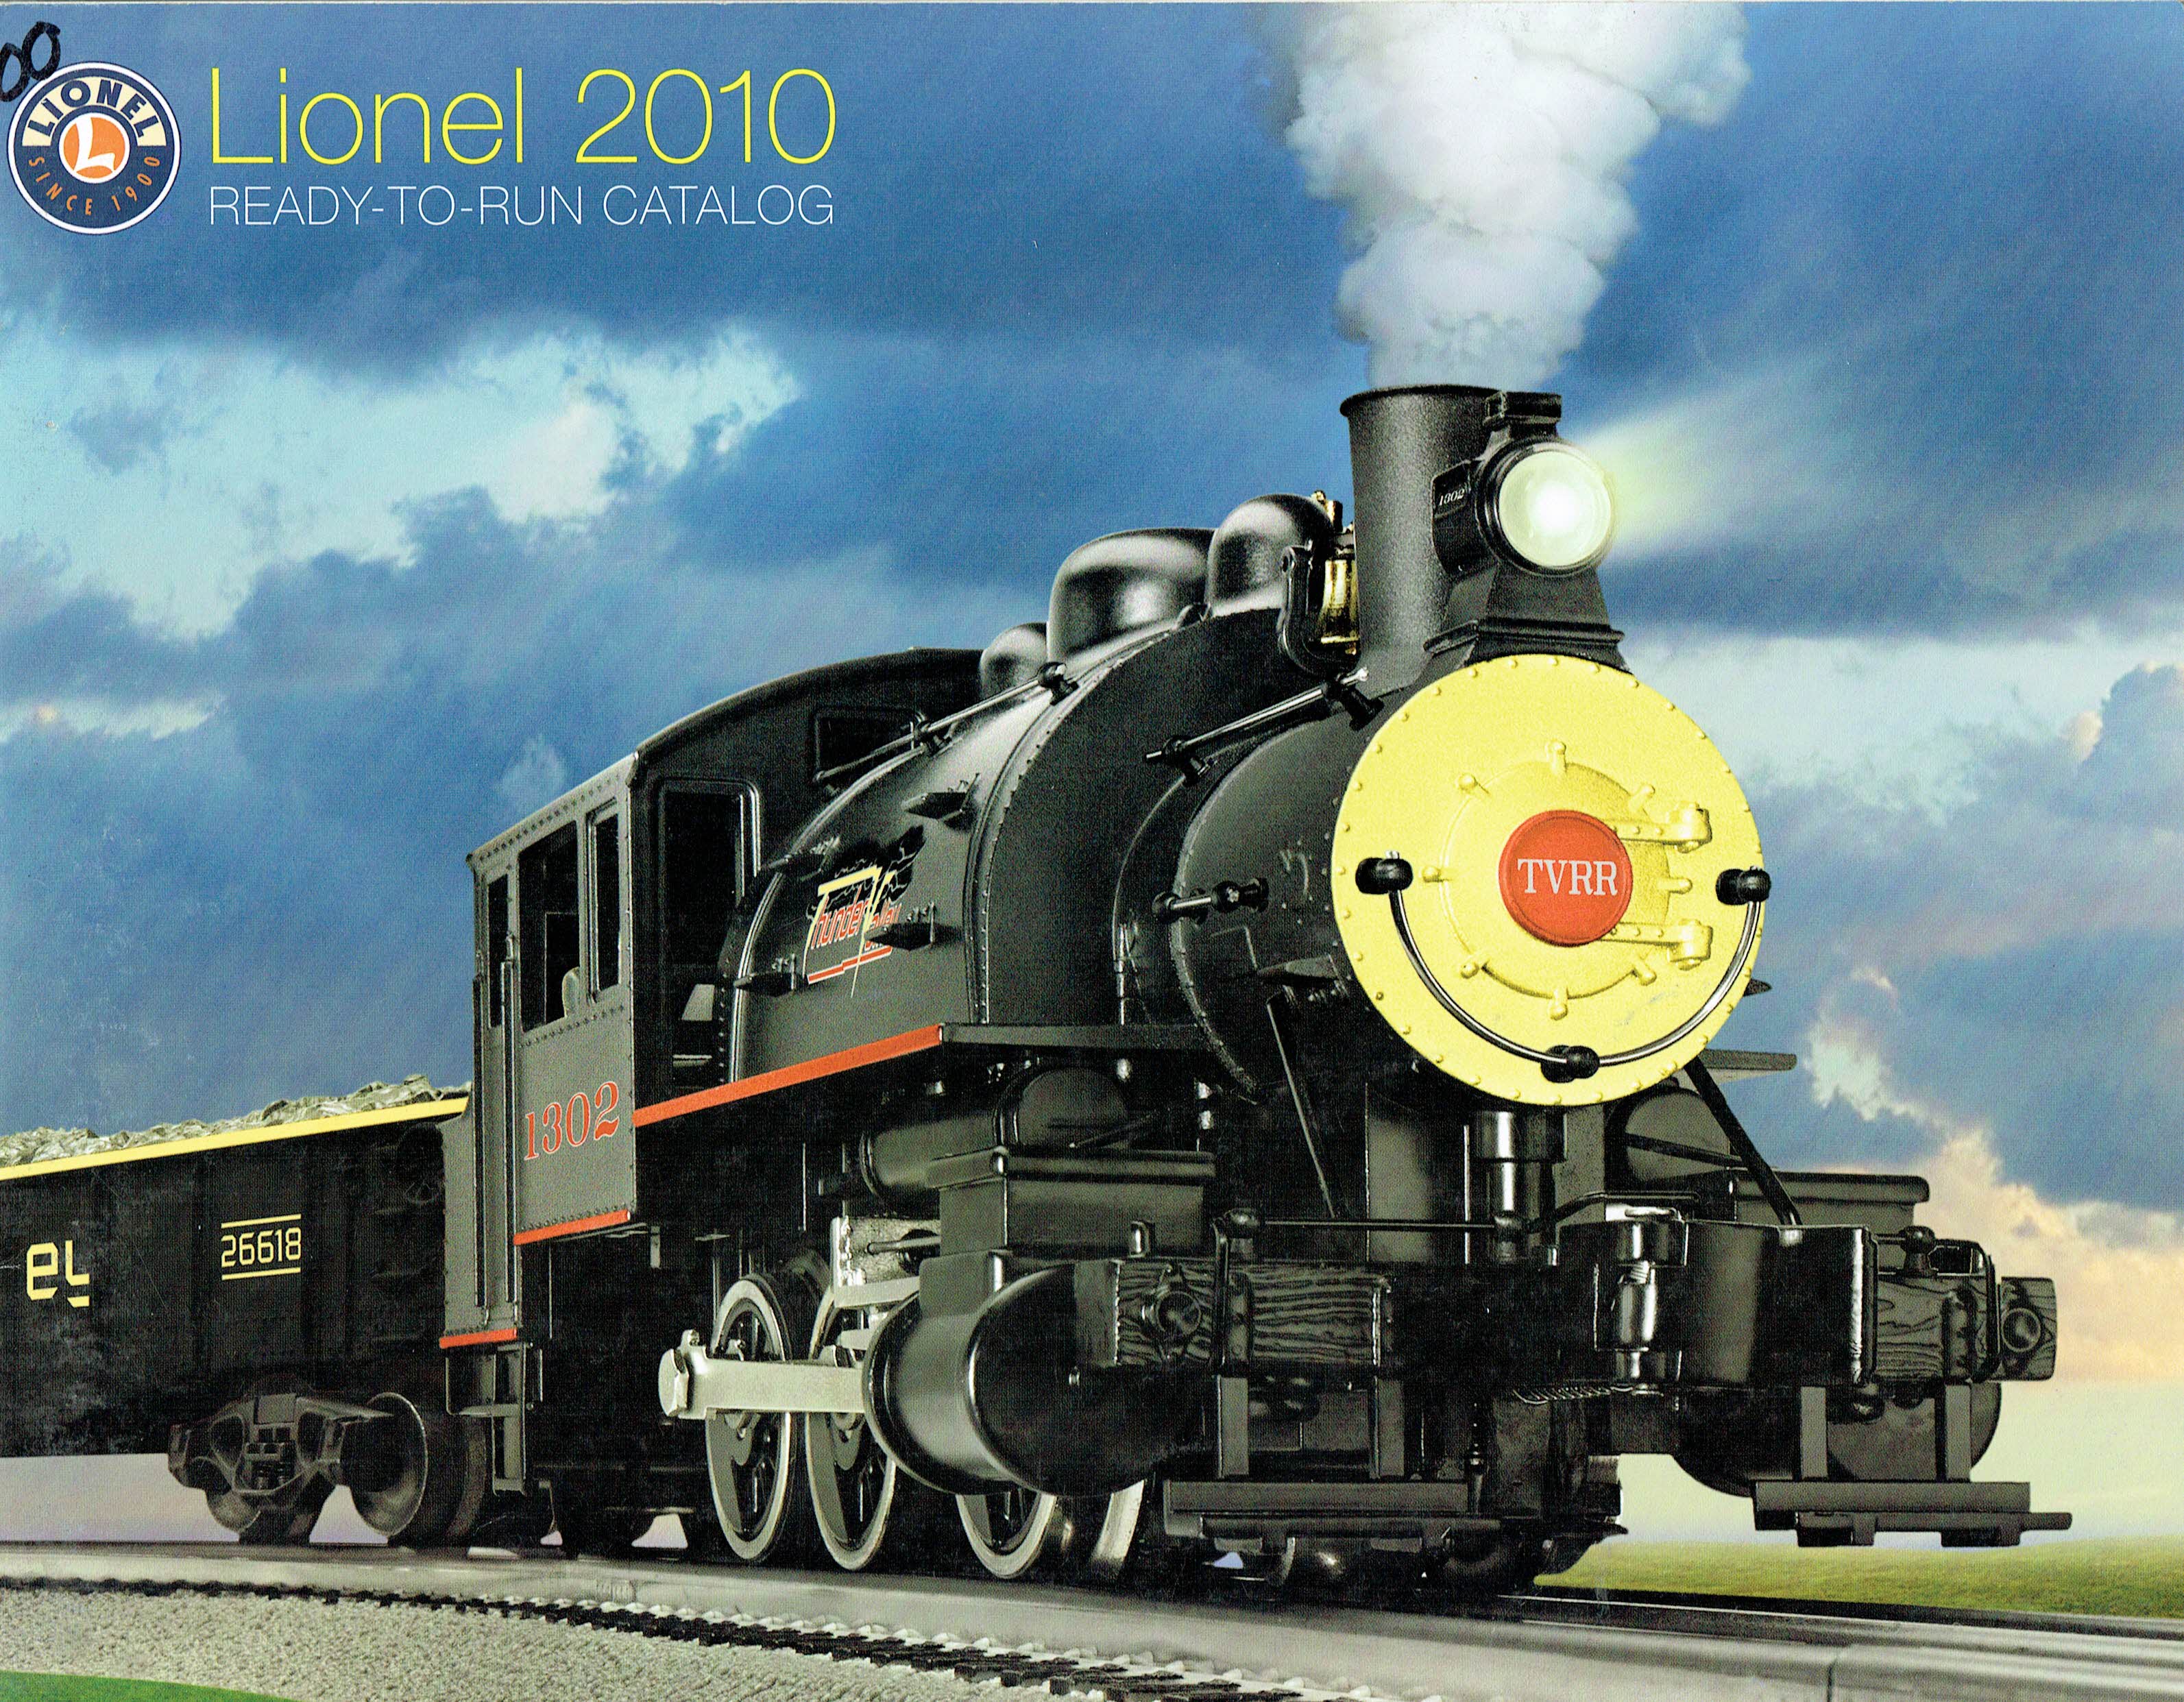 Lionel 2010 Ready-to-Run Catalog image